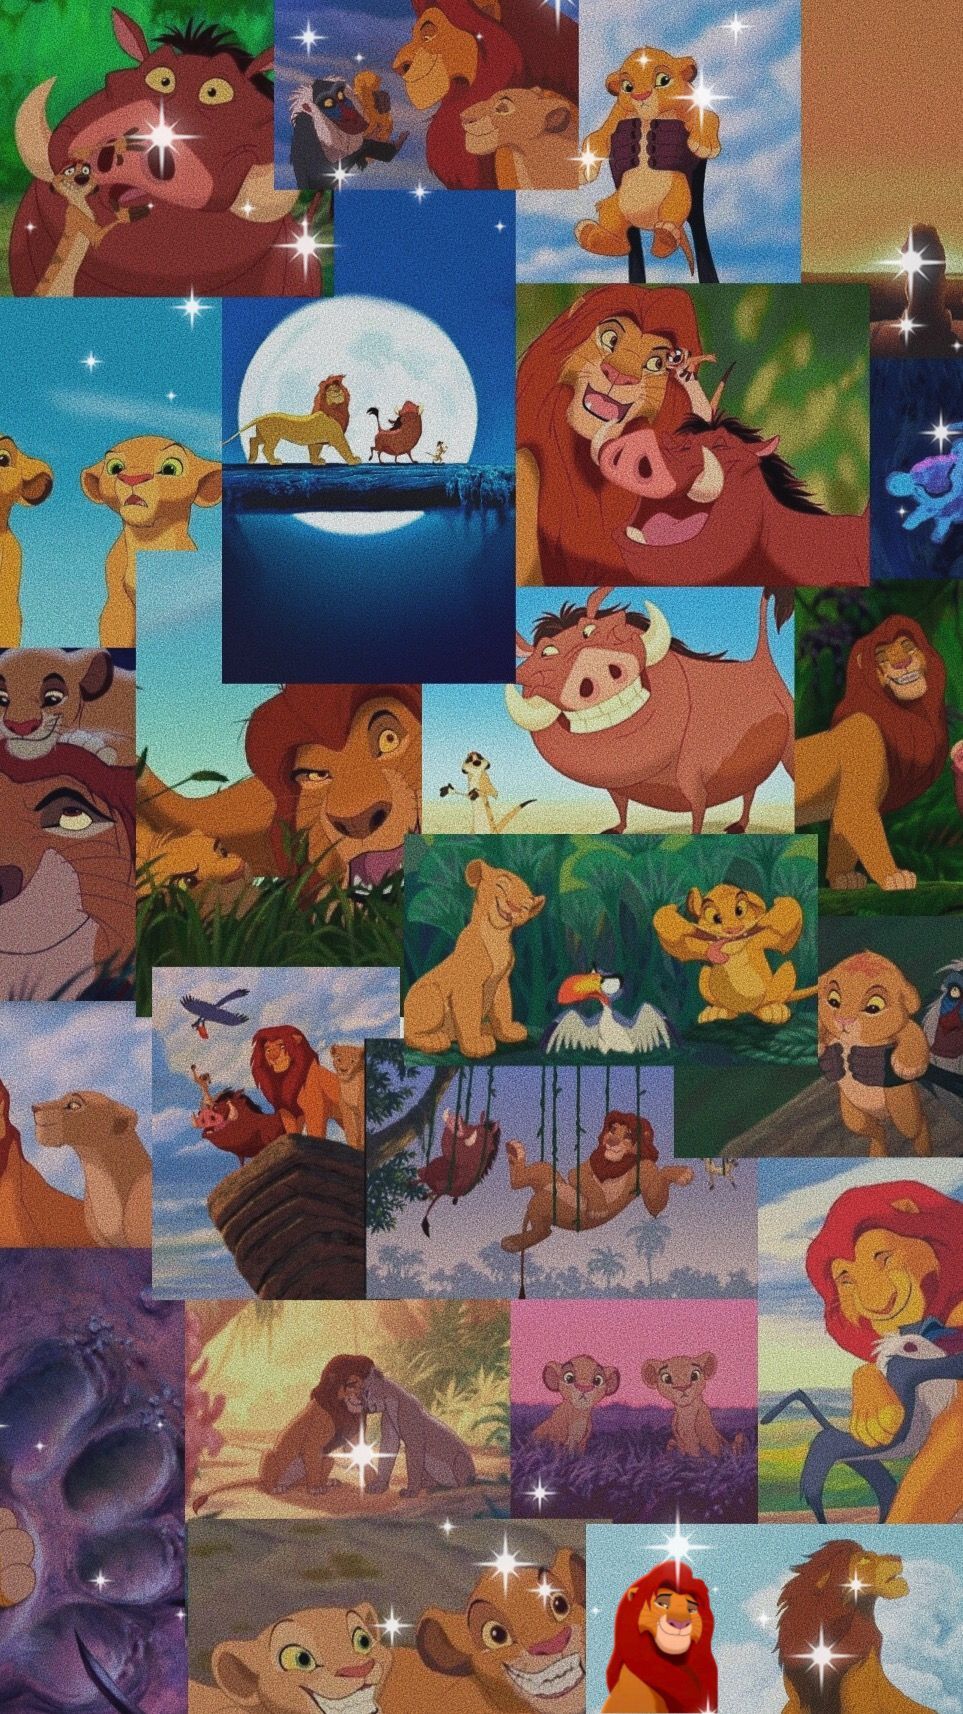 A collage of the lion king characters - The Lion King